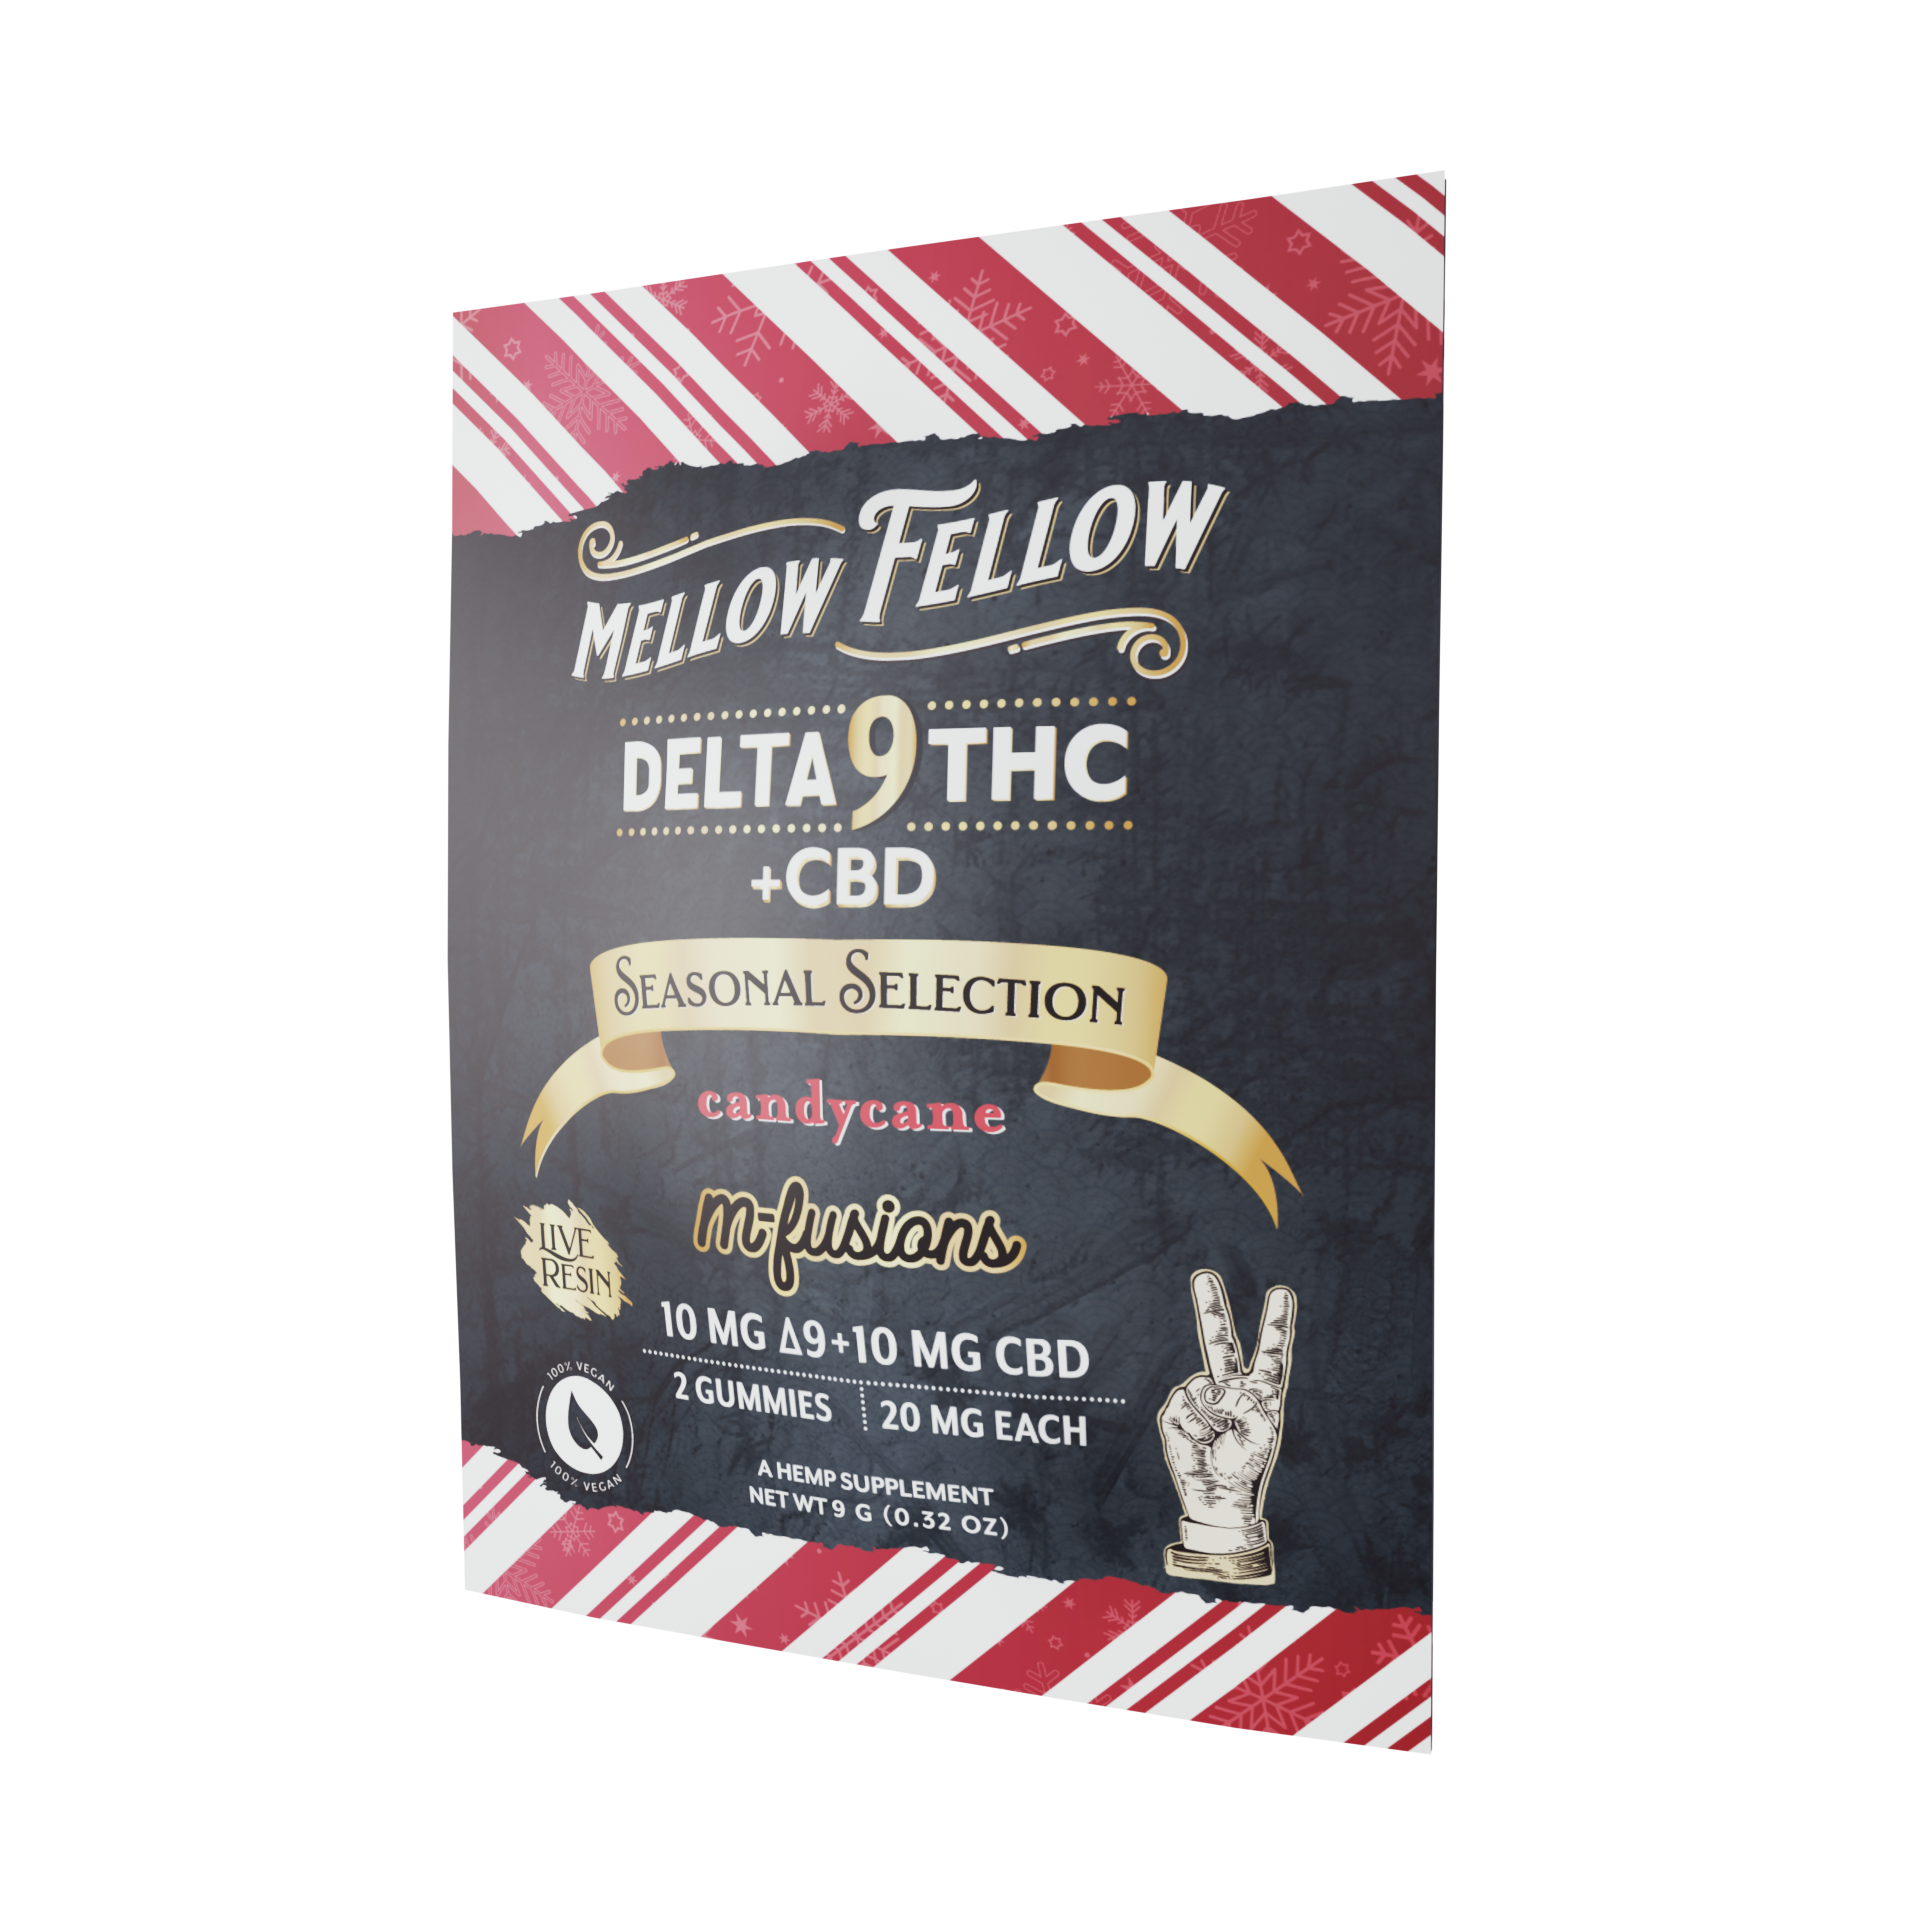 Live Resin Delta 9 Edibles - Seasonal Selections - Candy Cane Best Price